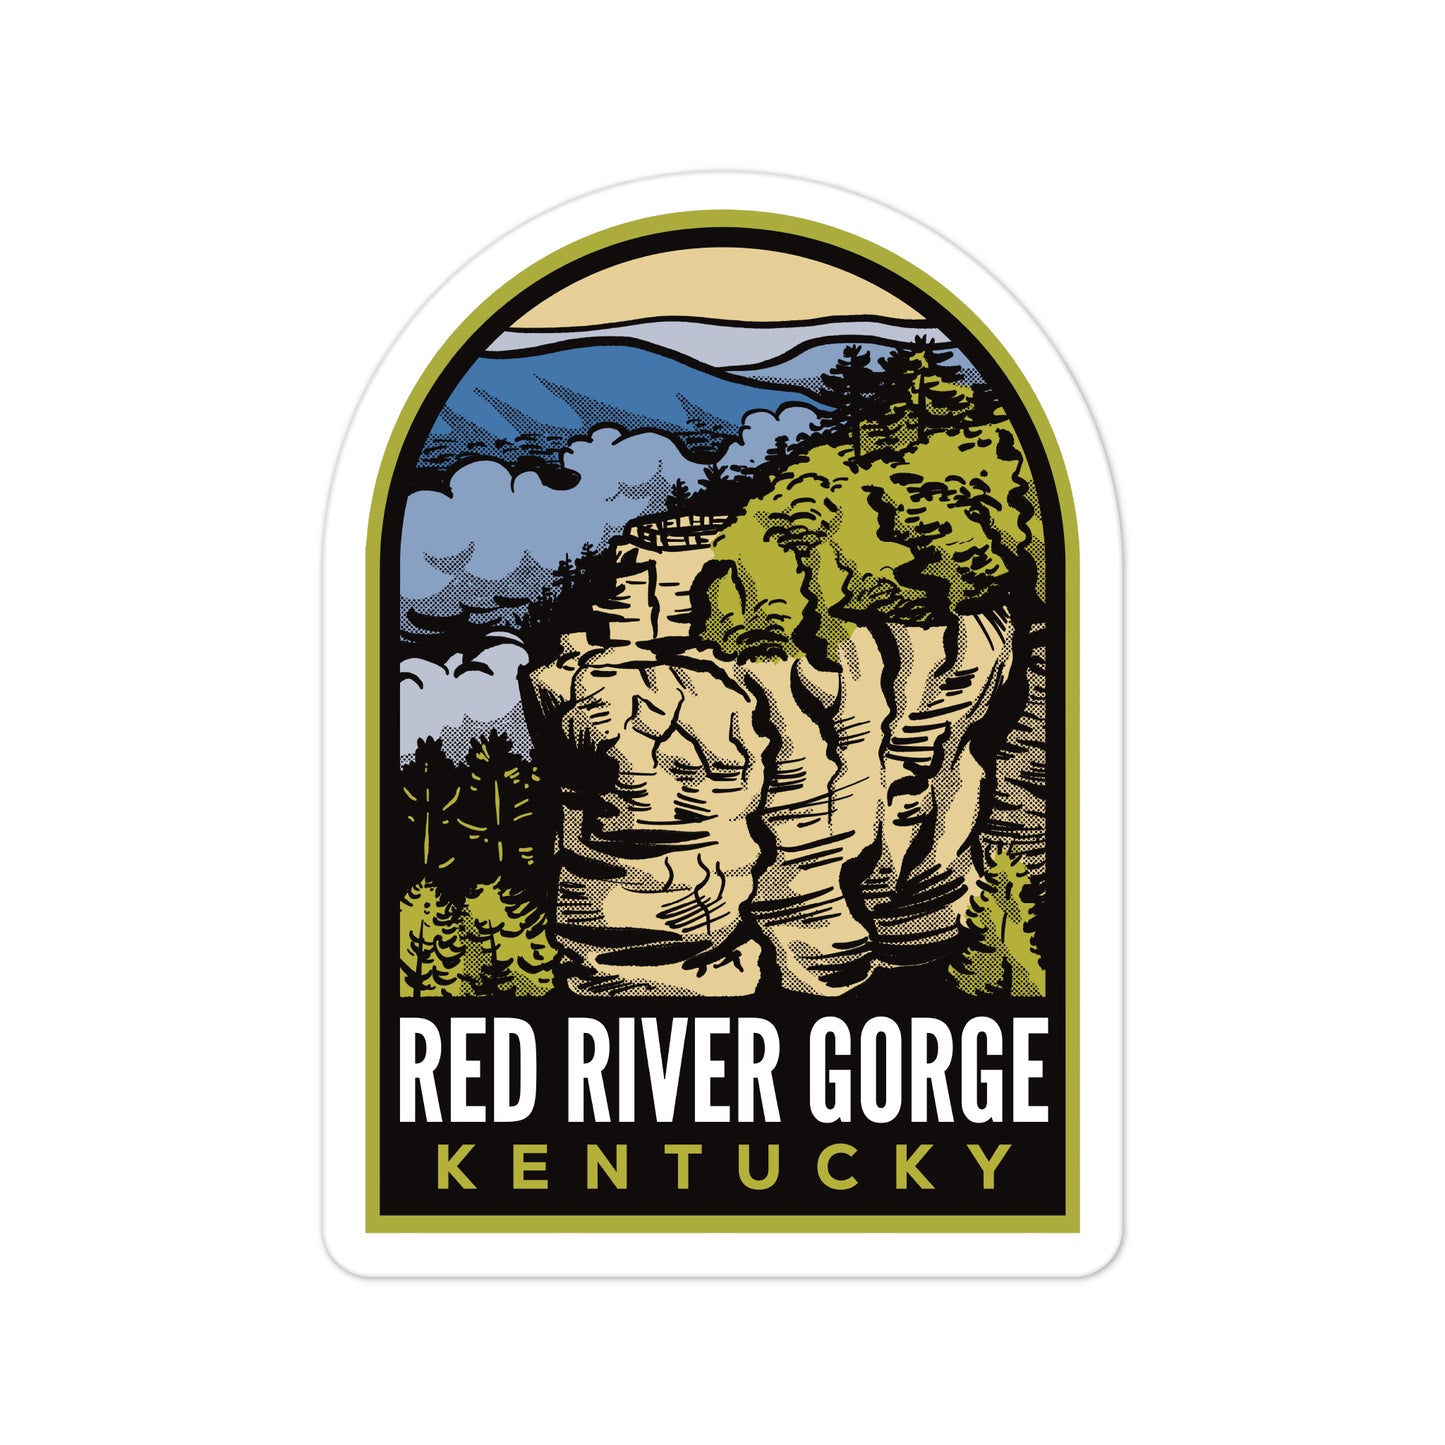 A sticker of Red River Gorge Kentucky